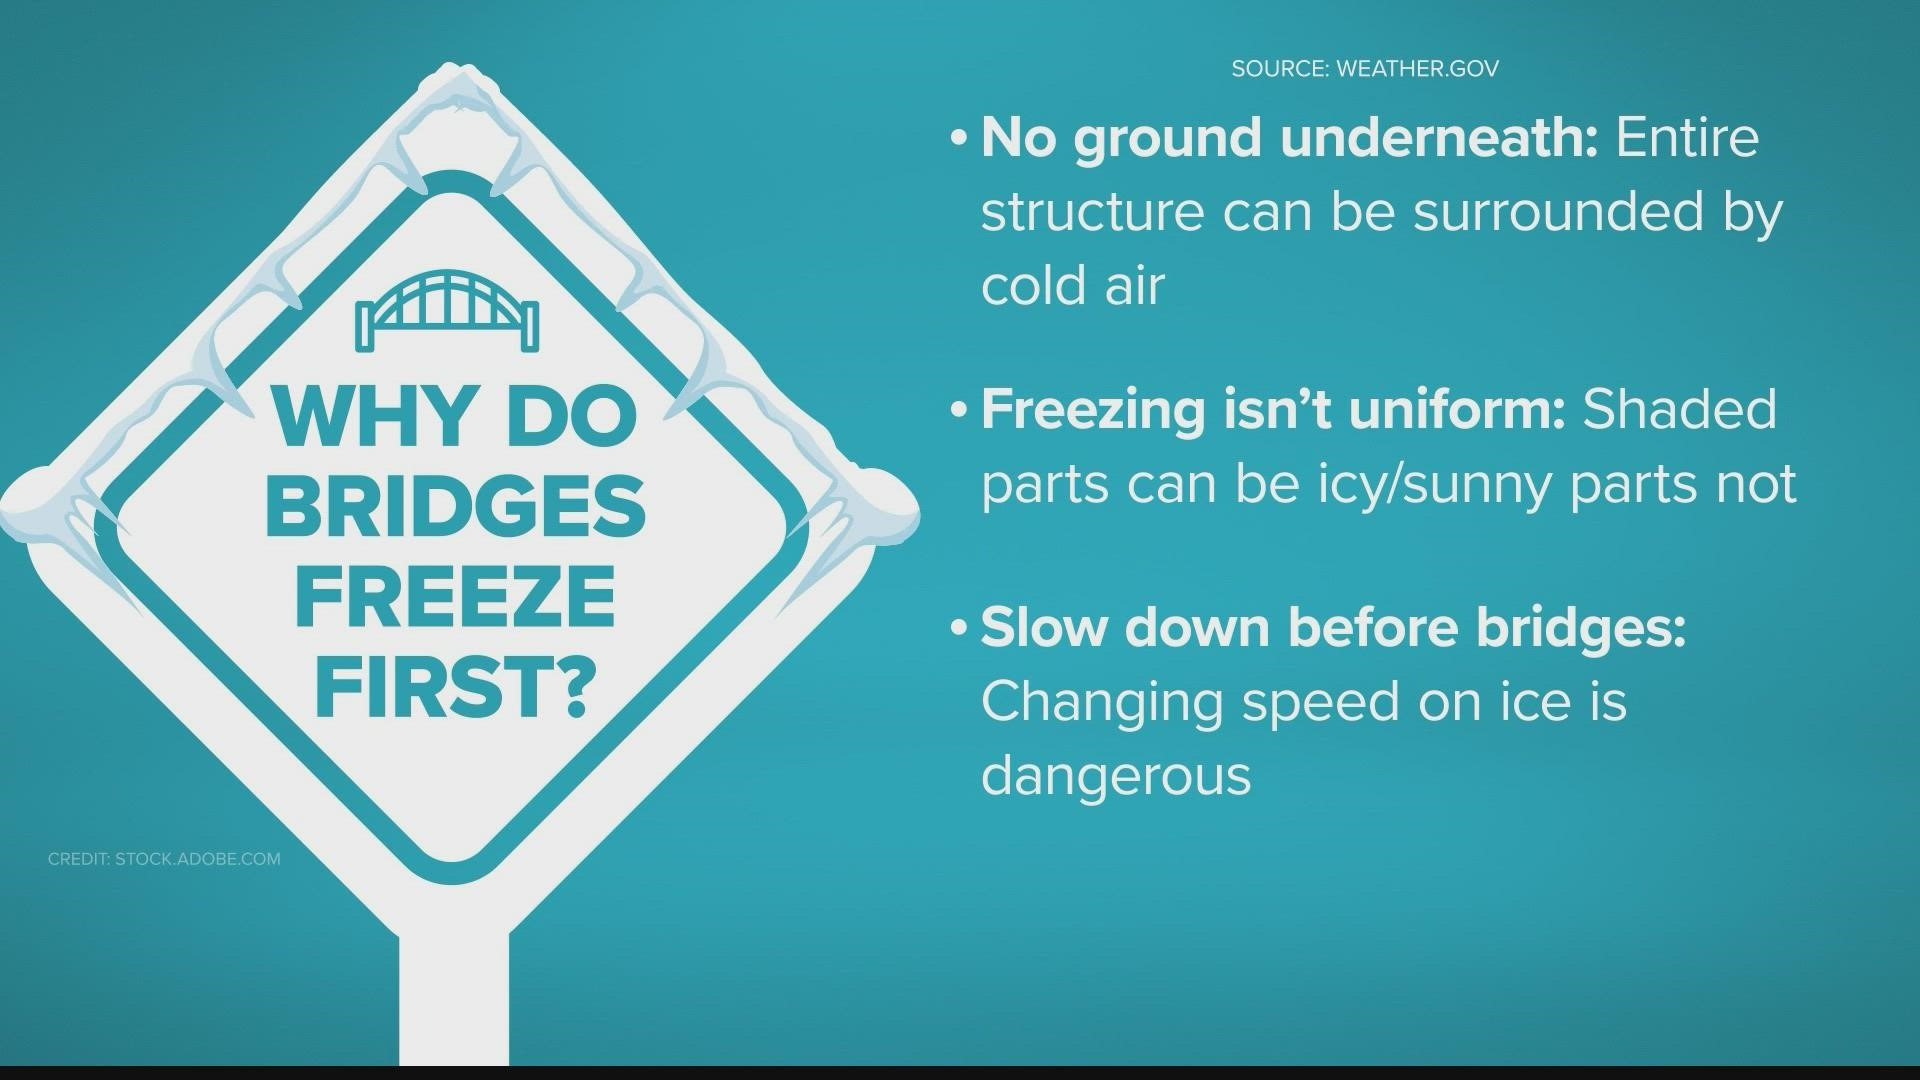 Wet and cold weather can make road conditions undrivable.